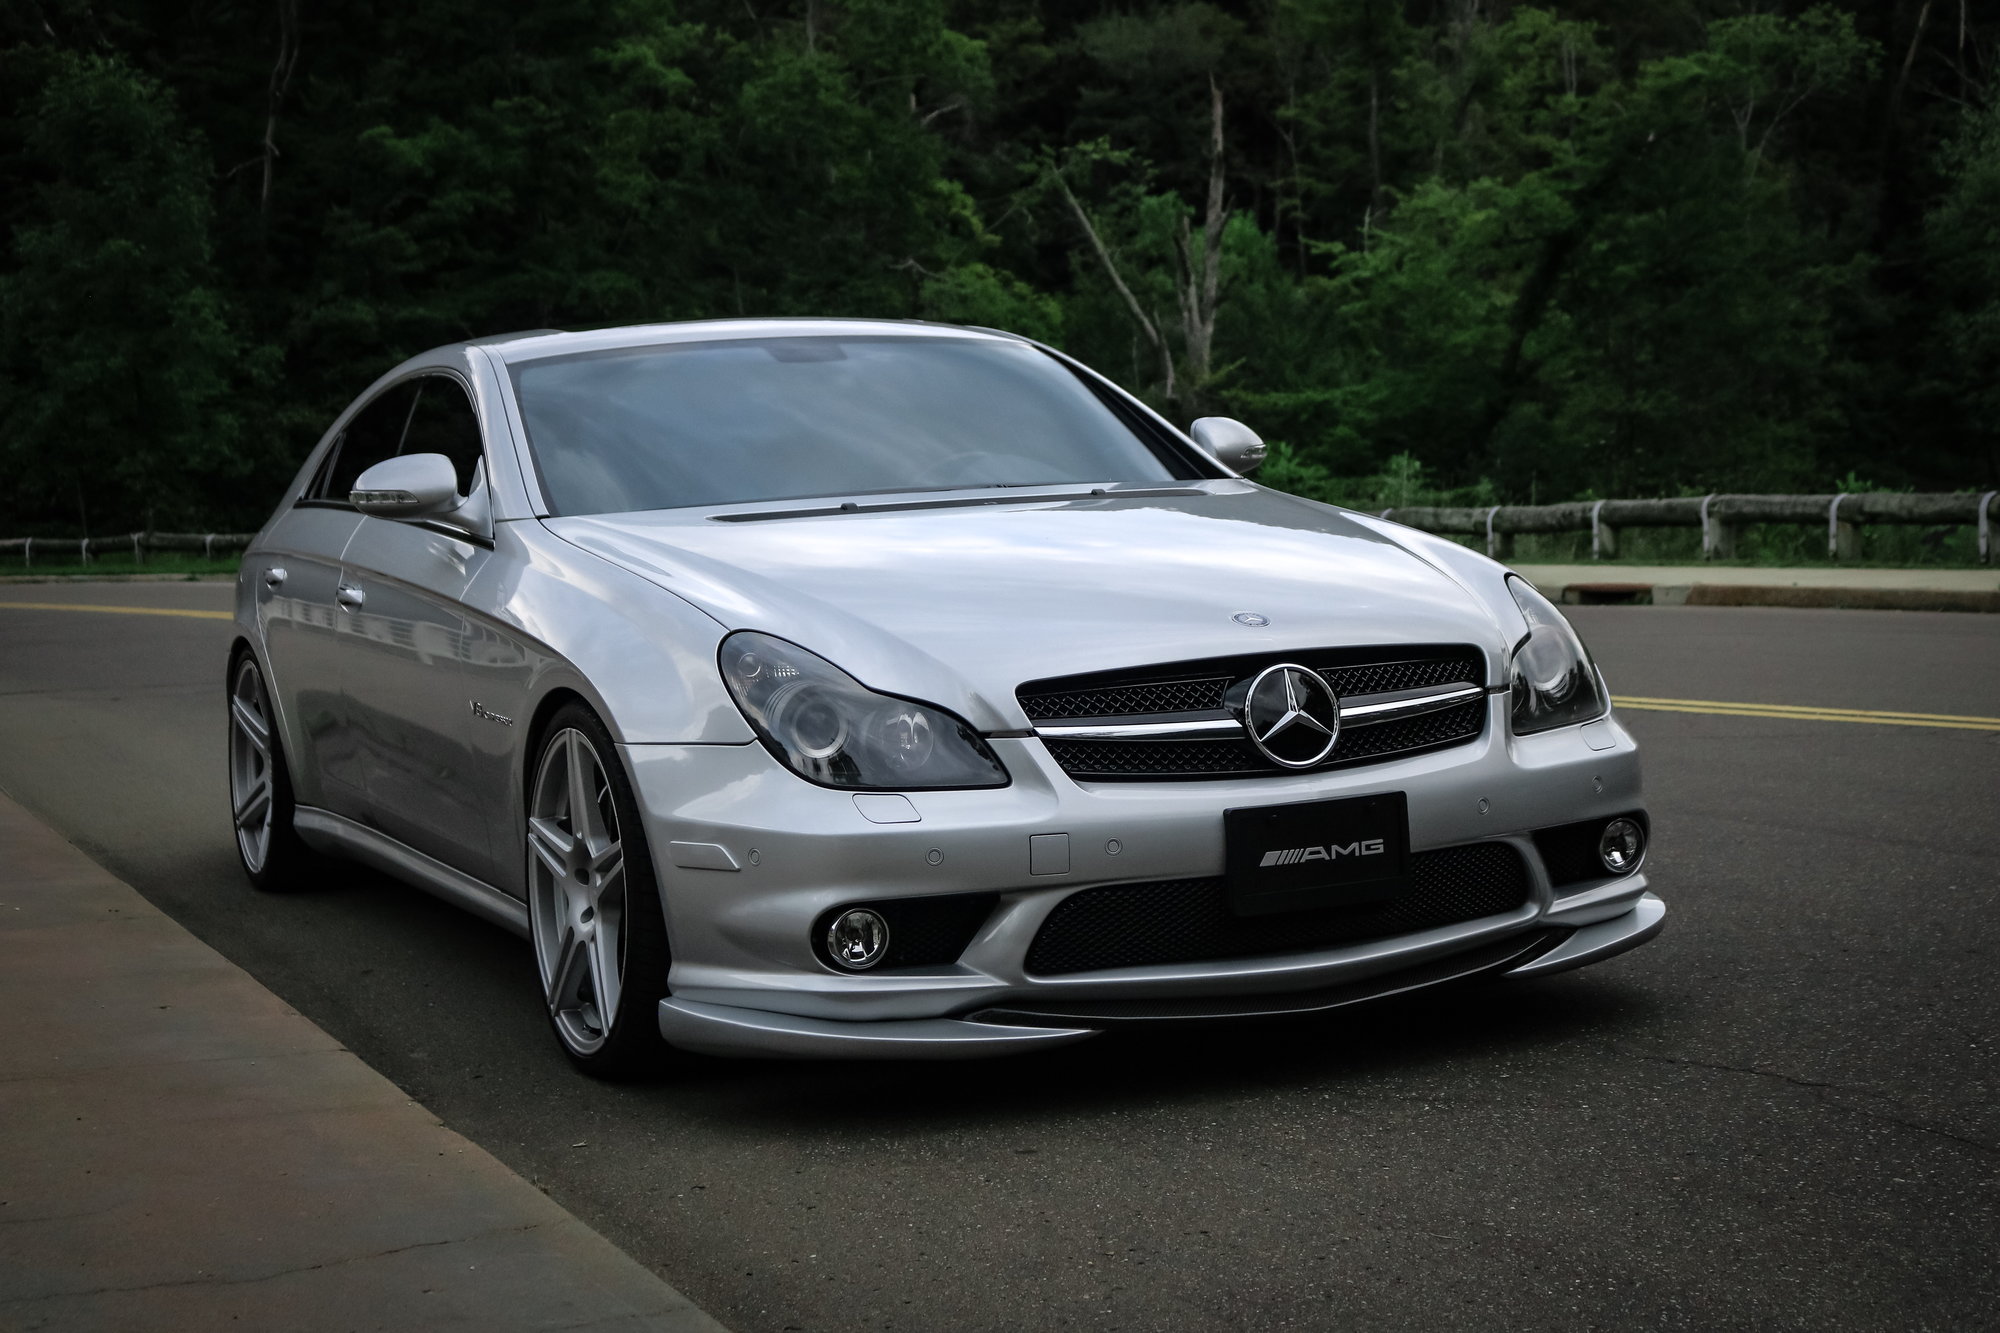 2006 Mercedes-Benz CLS55 AMG - 2006 Mercedes CLS55 AMG *Cleanest on the Market* - Used - VIN wdddj76x86a056823 - 8 cyl - Automatic - Silver - Canfield, OH 44406, United States